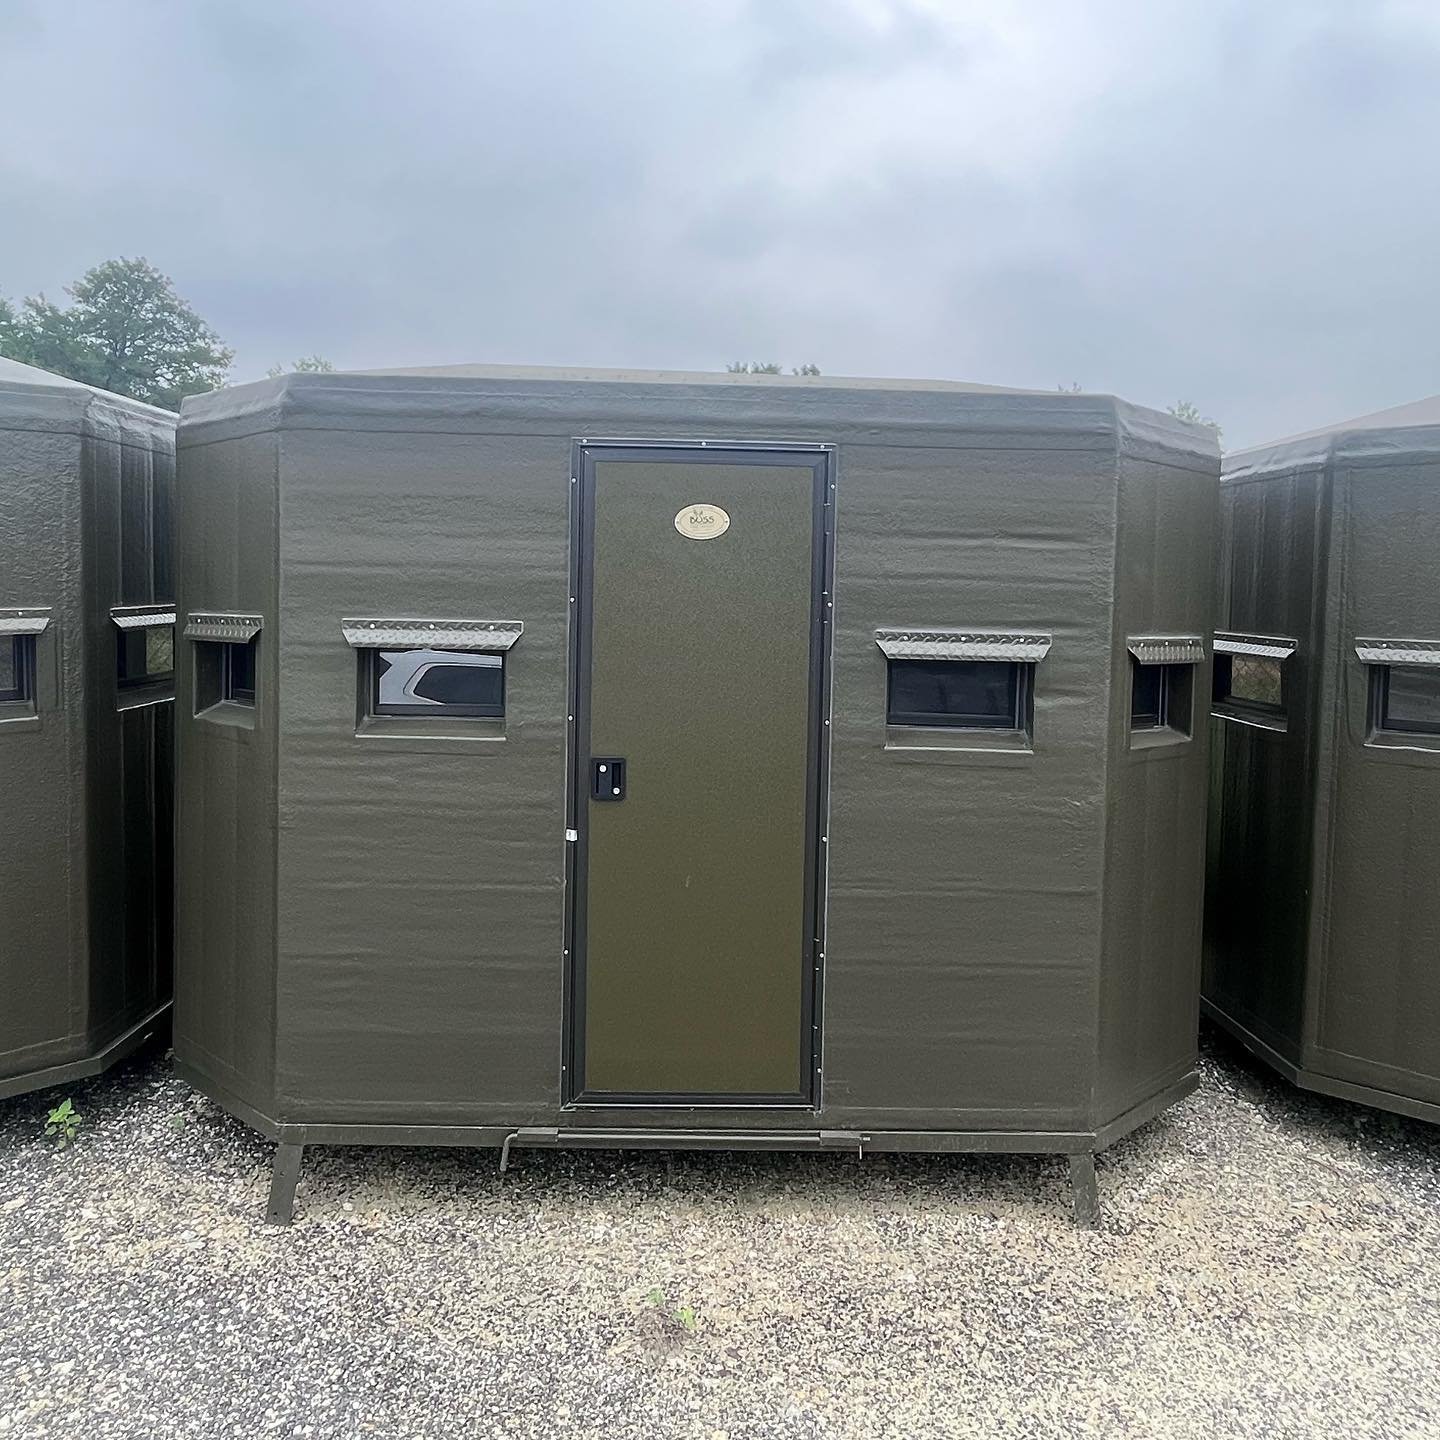 Our 7x10 High Roller 360 with added curtain kits and molded shelving would be the perfect addition to a ranch or lease! 🦌 #bossdoesitbest #bossgamesystems #bossdoescustom #bossblind #texashunting #hunting #deerseason #deerblind #ranchlife #deerlease